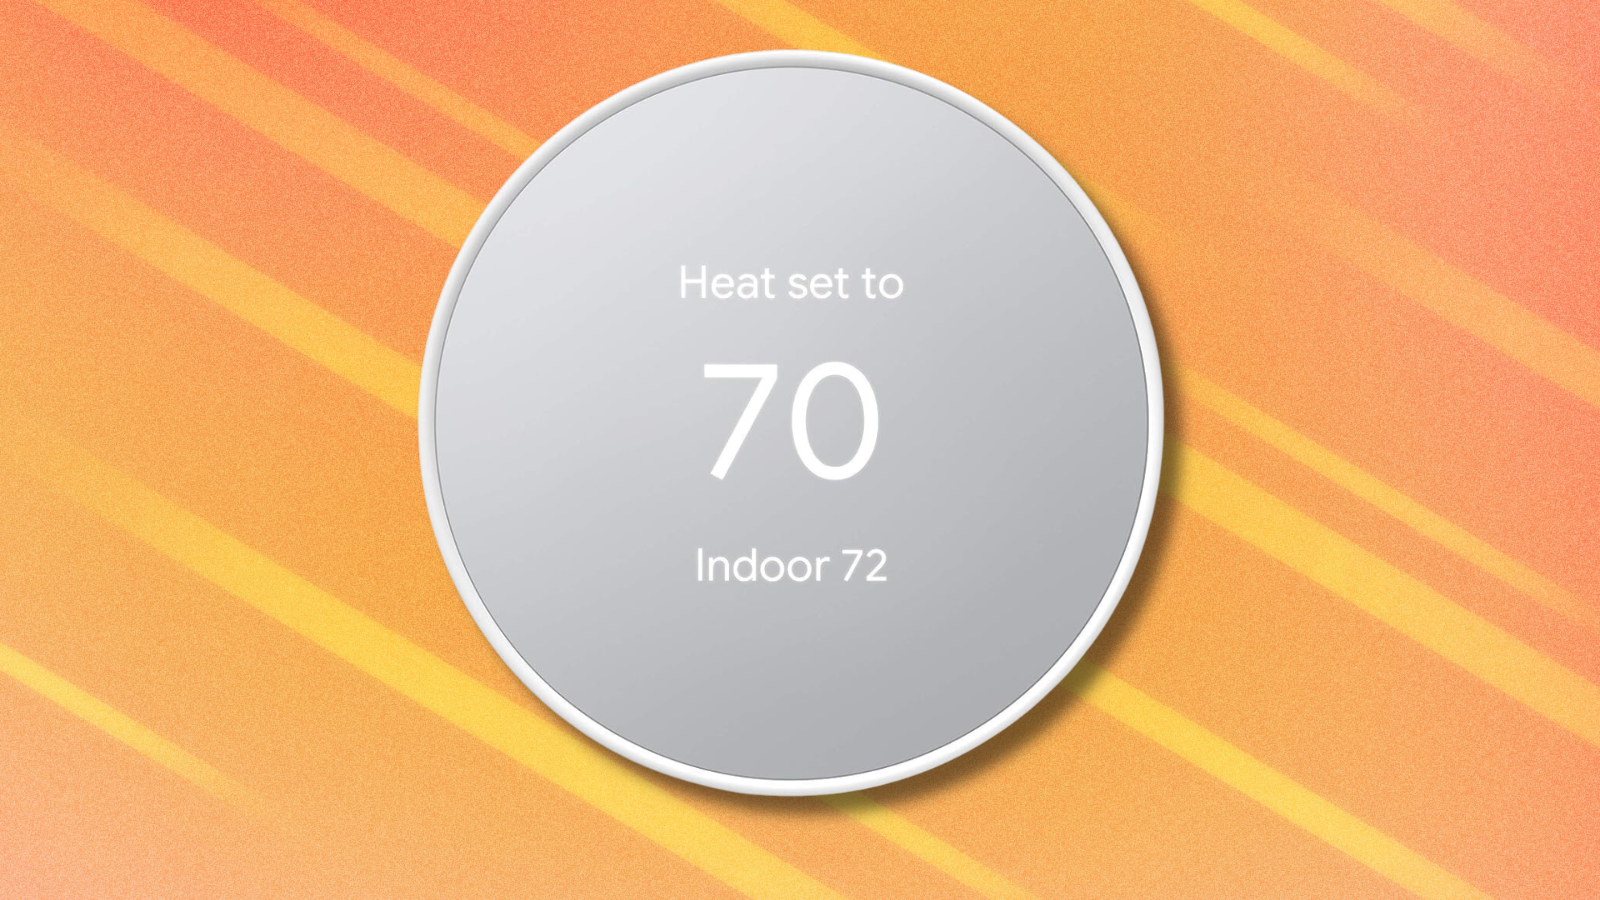 Add a Google Nest to your home for 35% off and never fight over the thermostat again